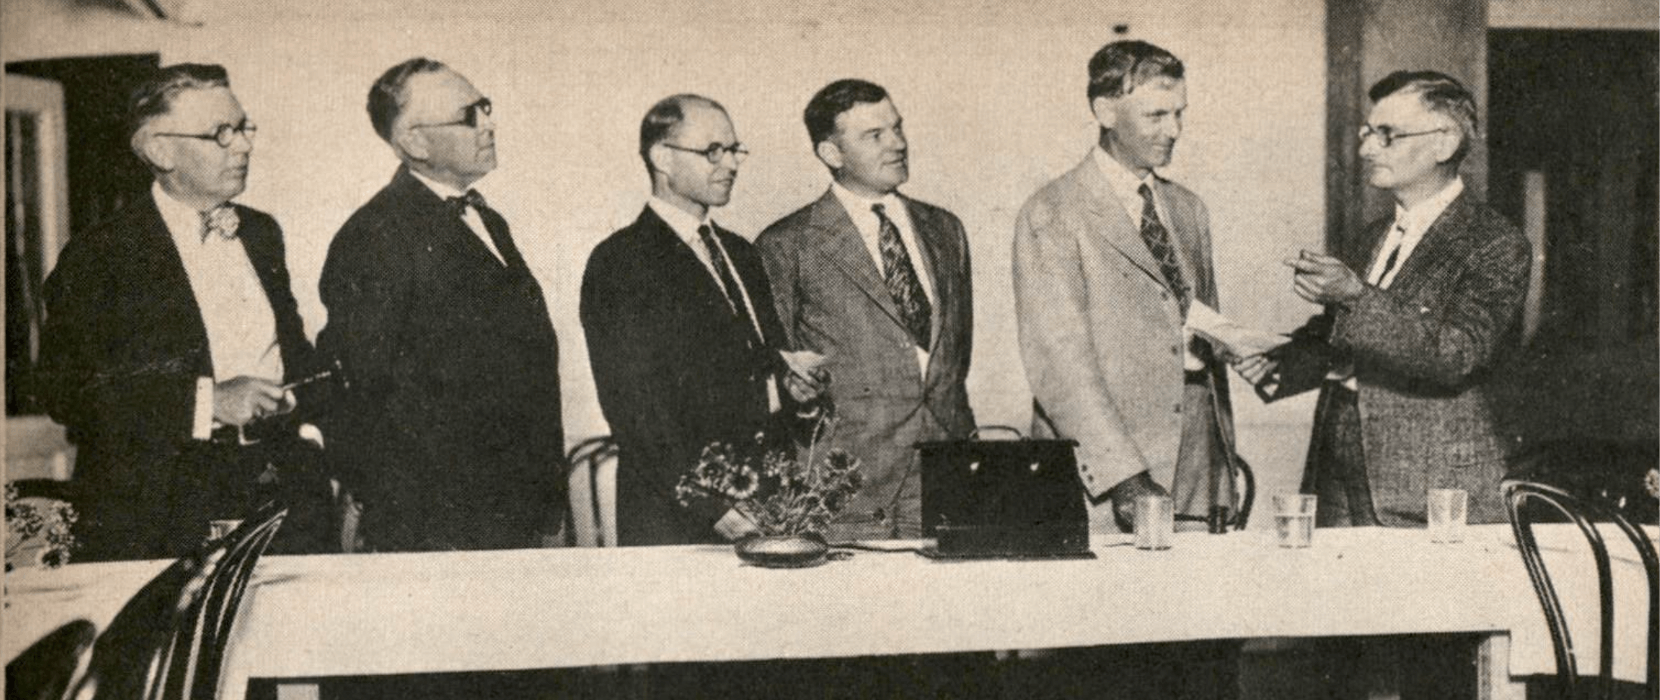 Black and white photo of six men standing behind a table